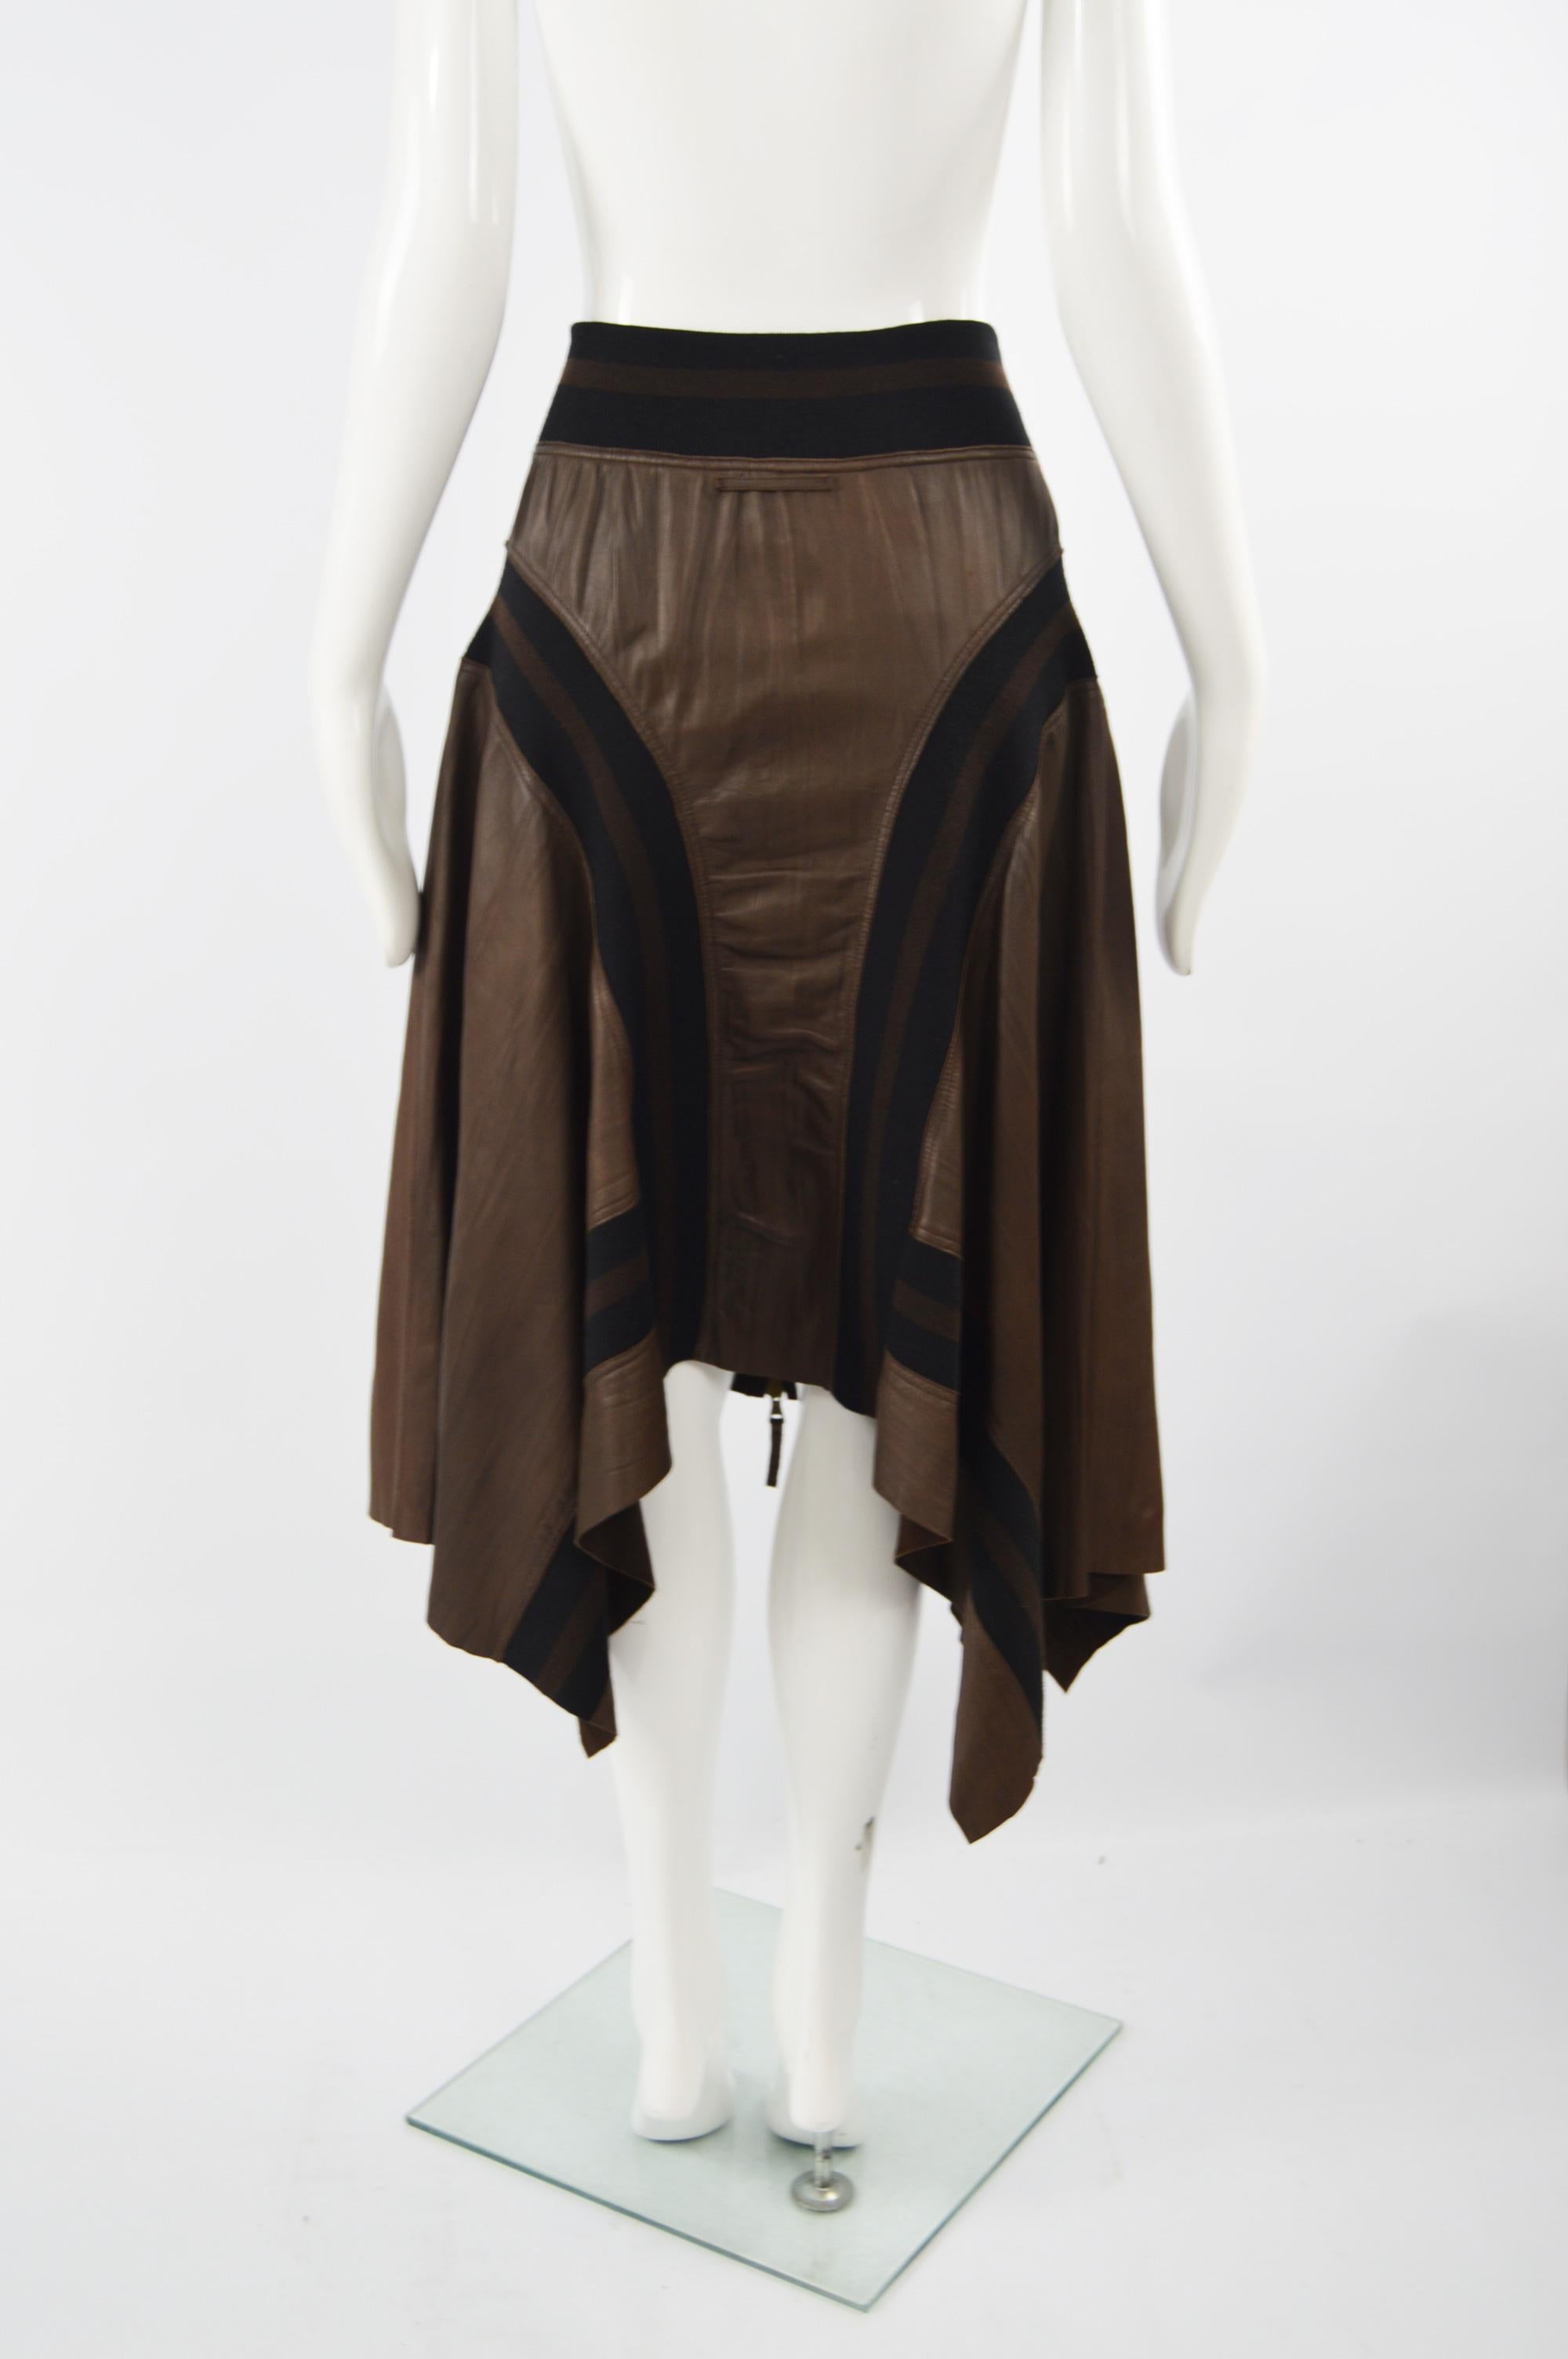 Jean Paul Gaultier Sheepskin Leather Vintage Skirt In Good Condition For Sale In Doncaster, South Yorkshire